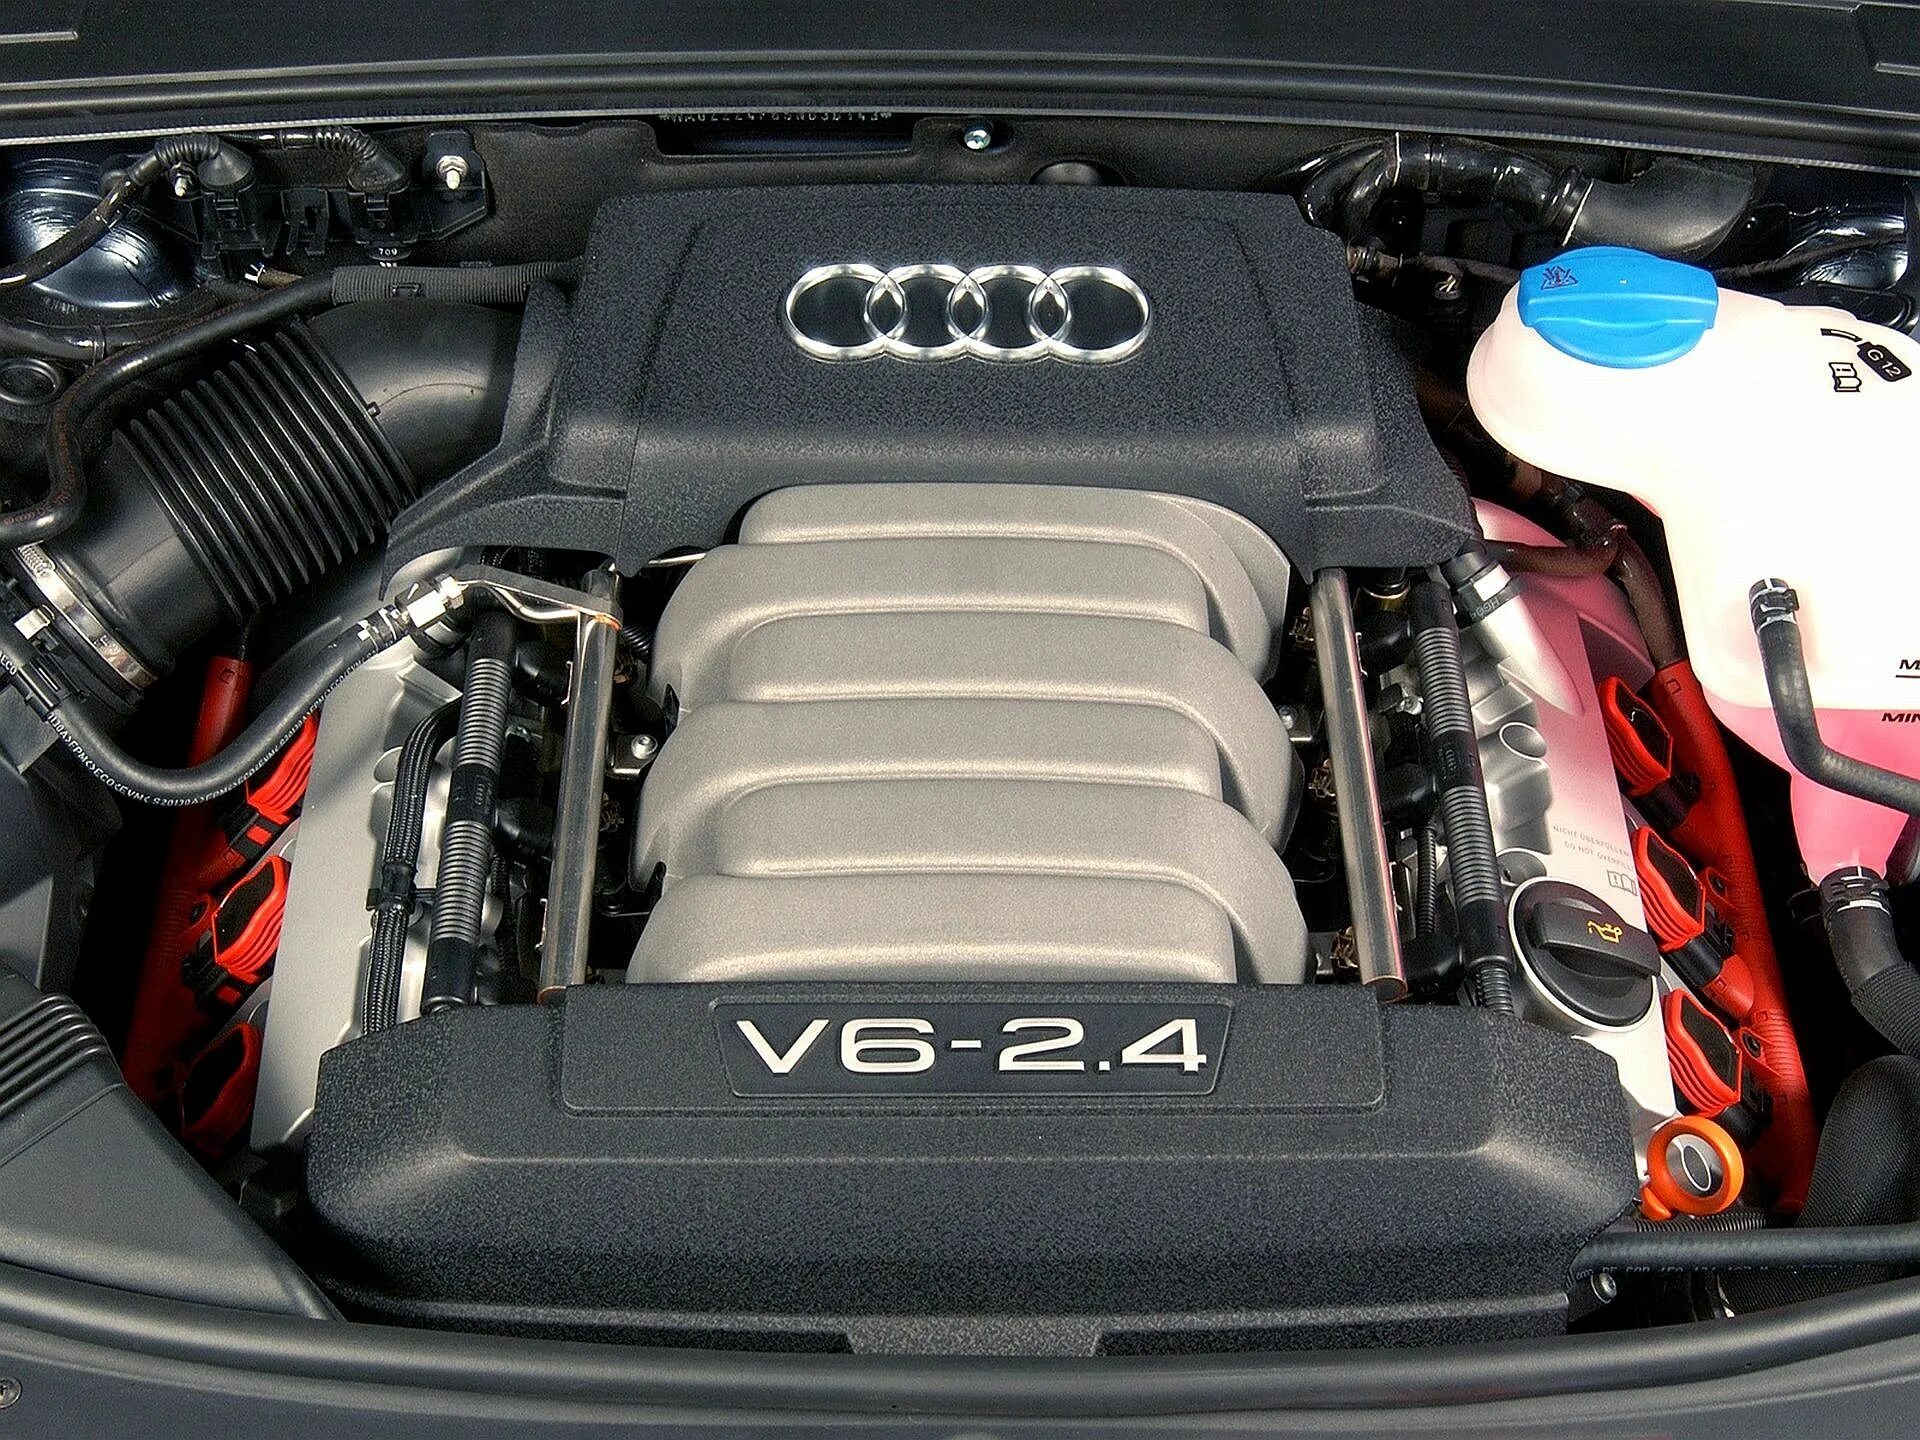 Bdw ауди а6 с6. Audi a6 v6. 3.2 V6 Audi a3. Audi 2.6 v6. Audi a6 2.4 2007 мотор.